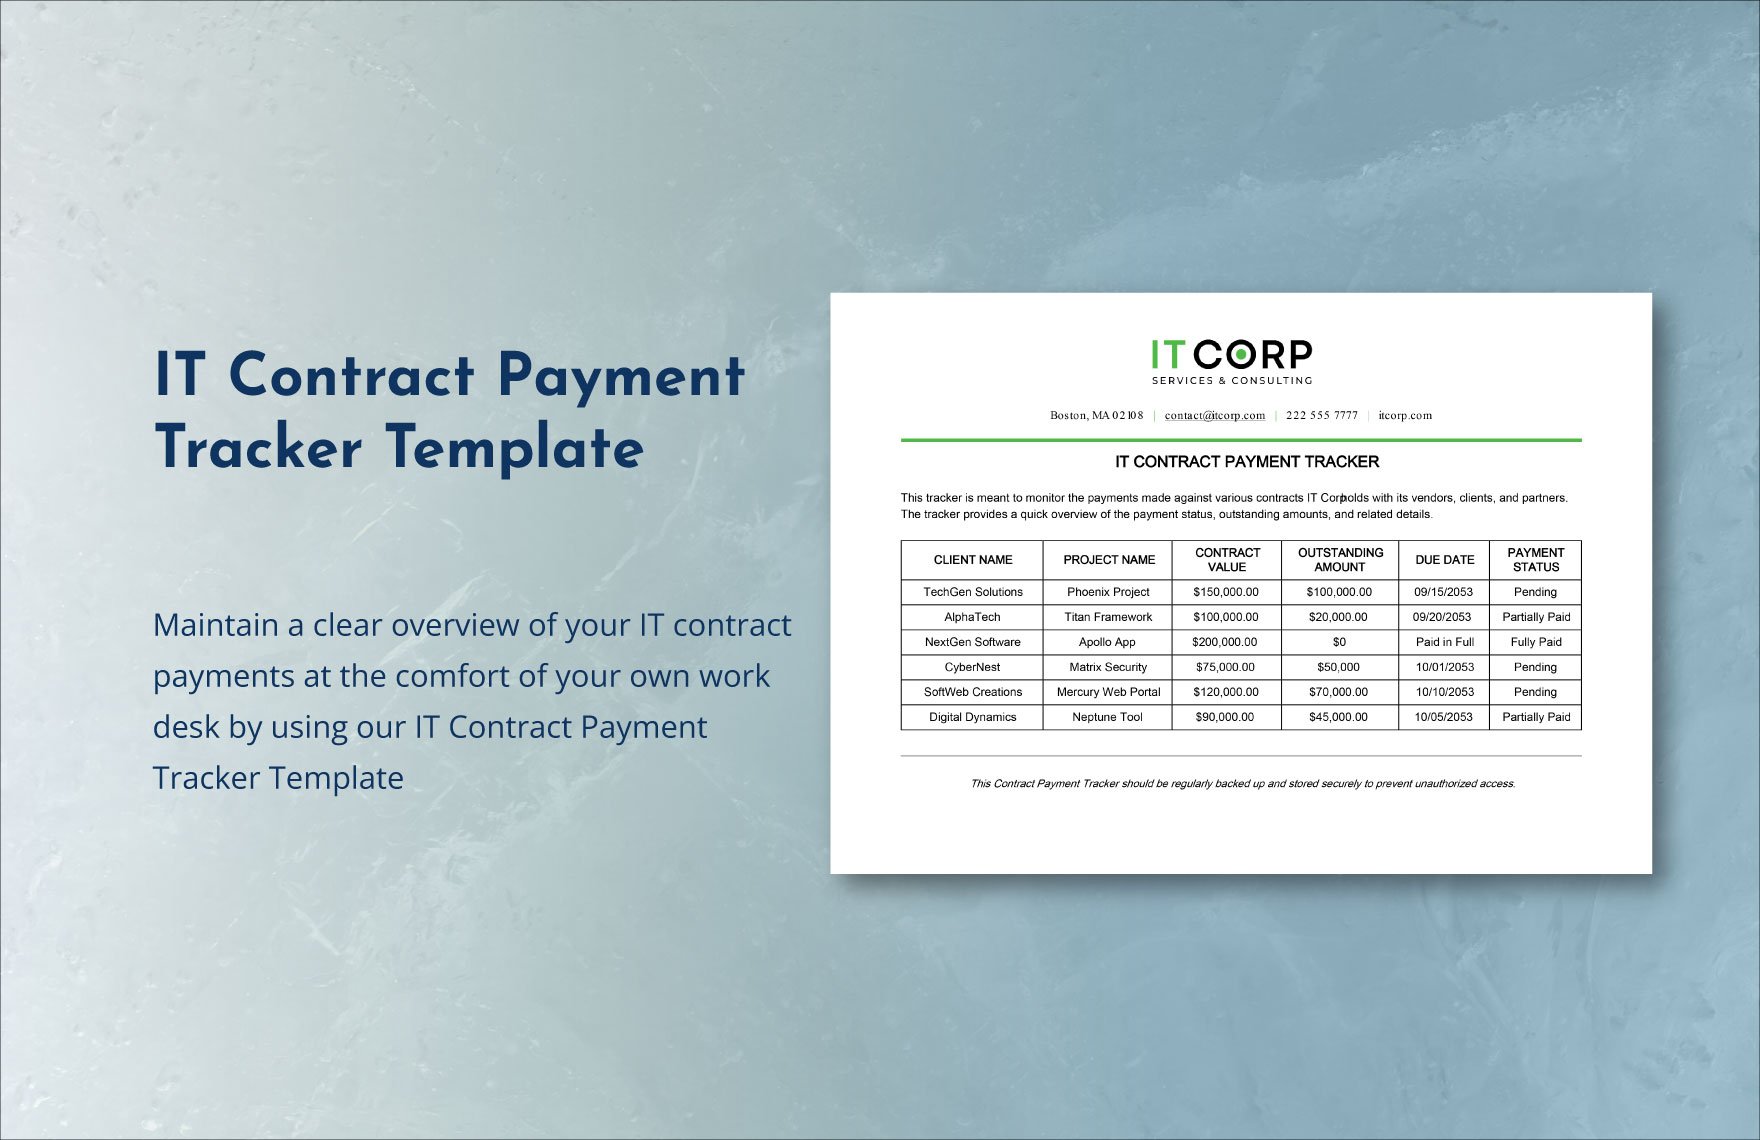 IT Contract Payment Tracker Template